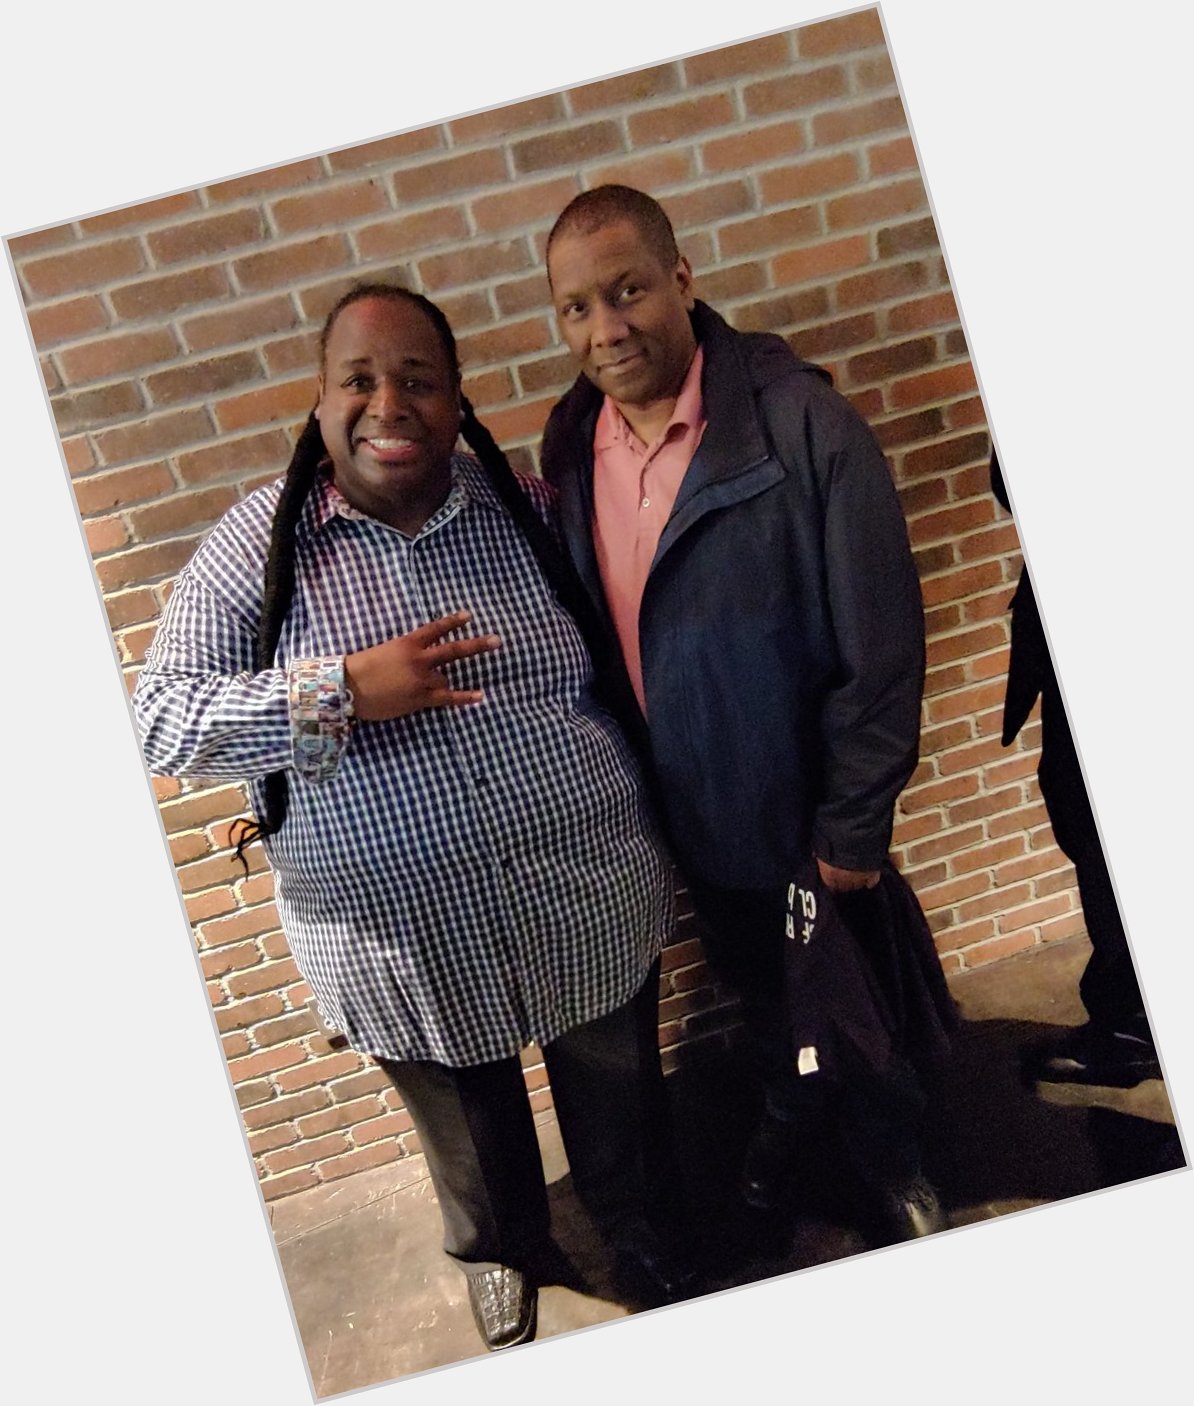 Went to the Hard Rock in Tulsa for my birthday and met the legendary Bruce Bruce, playas!  Happy 50th to me 